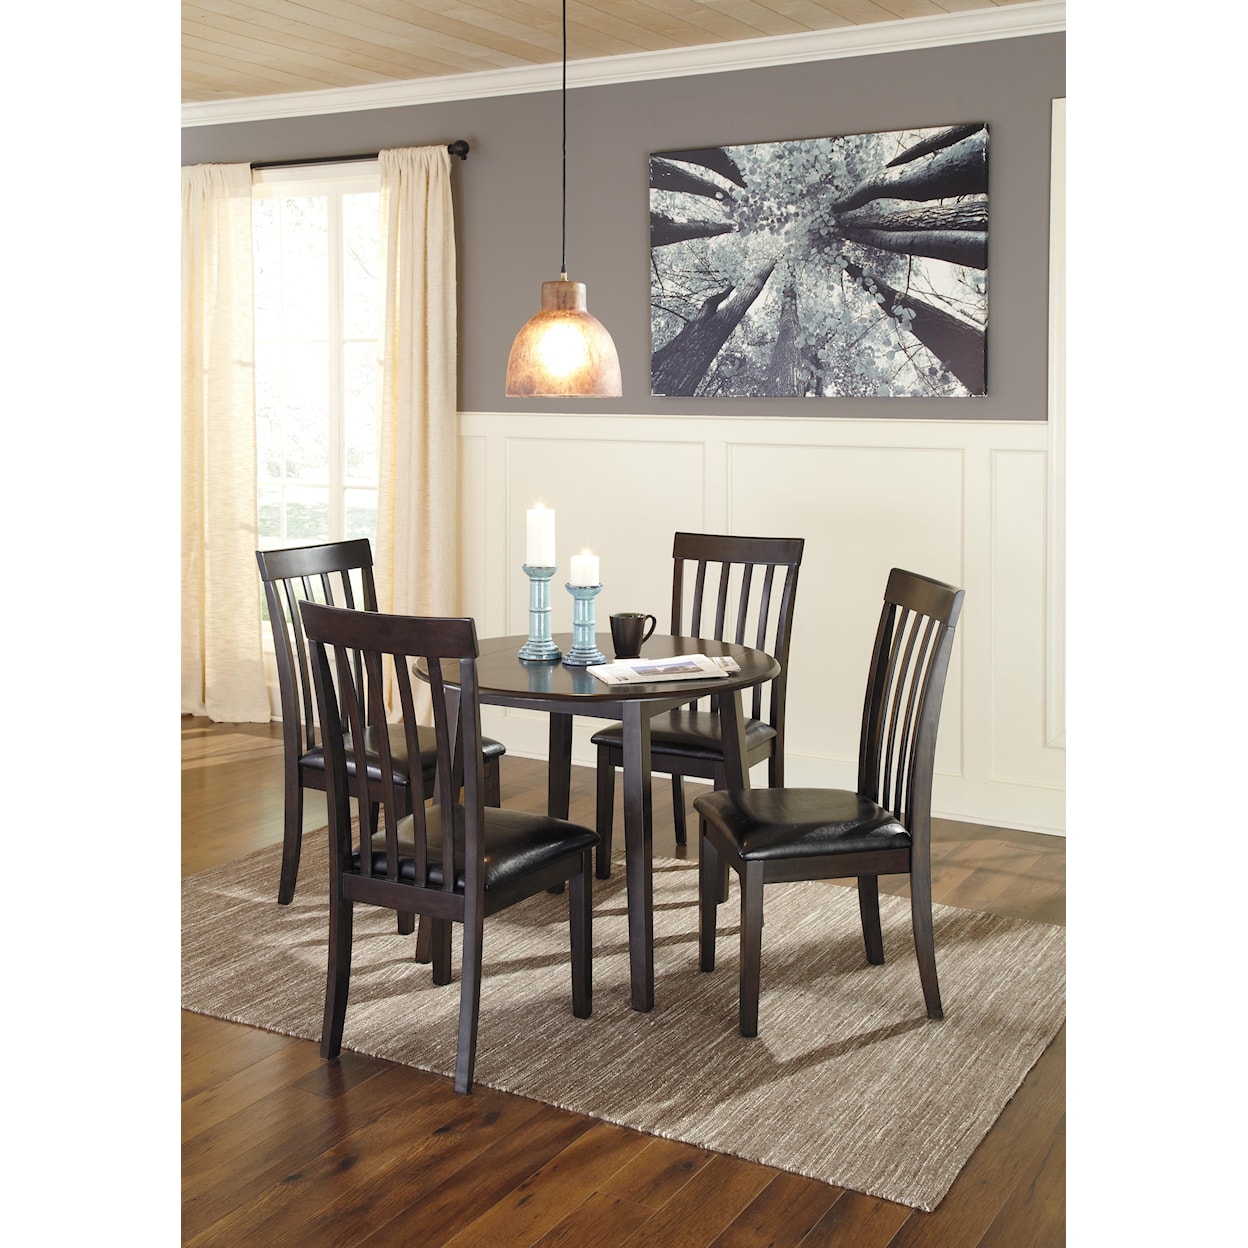 Signature Design by Ashley Hammis 5pc Dining Room Group